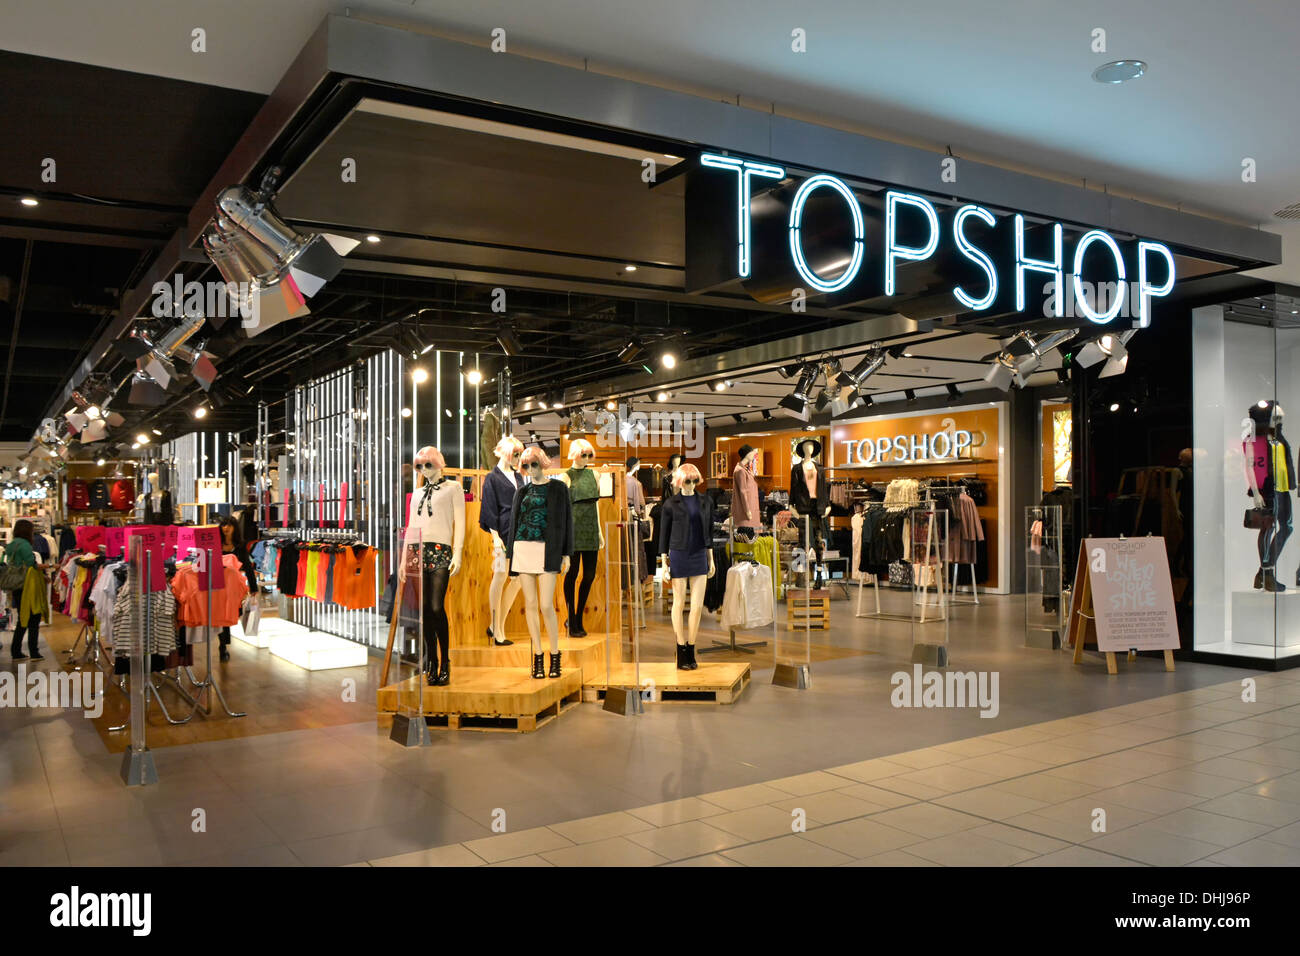 Topshop store in the Lakeside indoor shopping malls Stock Photo - Alamy